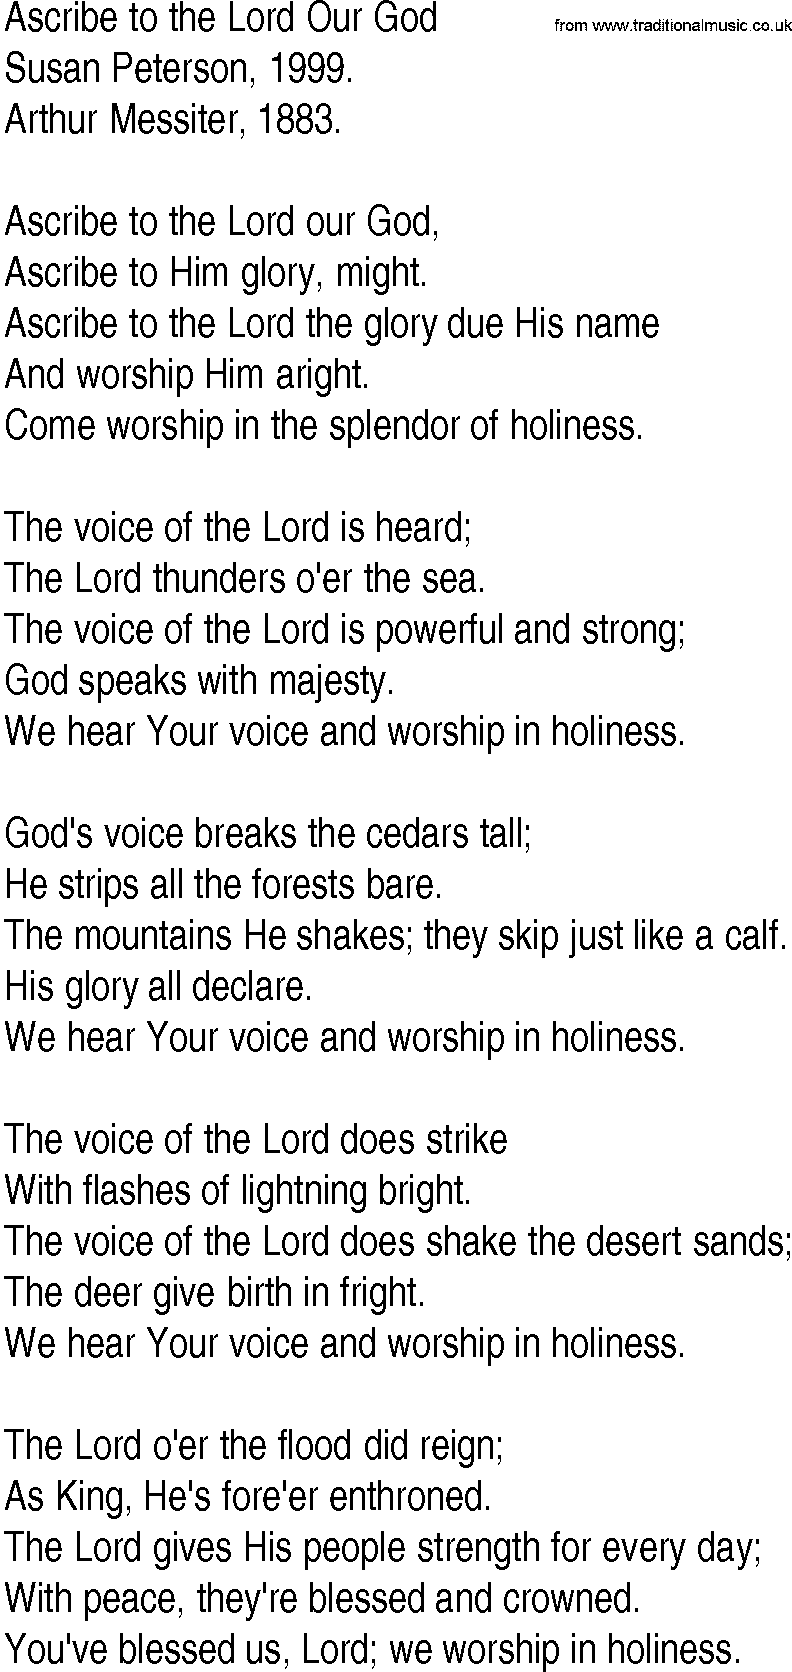 Hymn and Gospel Song: Ascribe to the Lord Our God by Susan Peterson lyrics